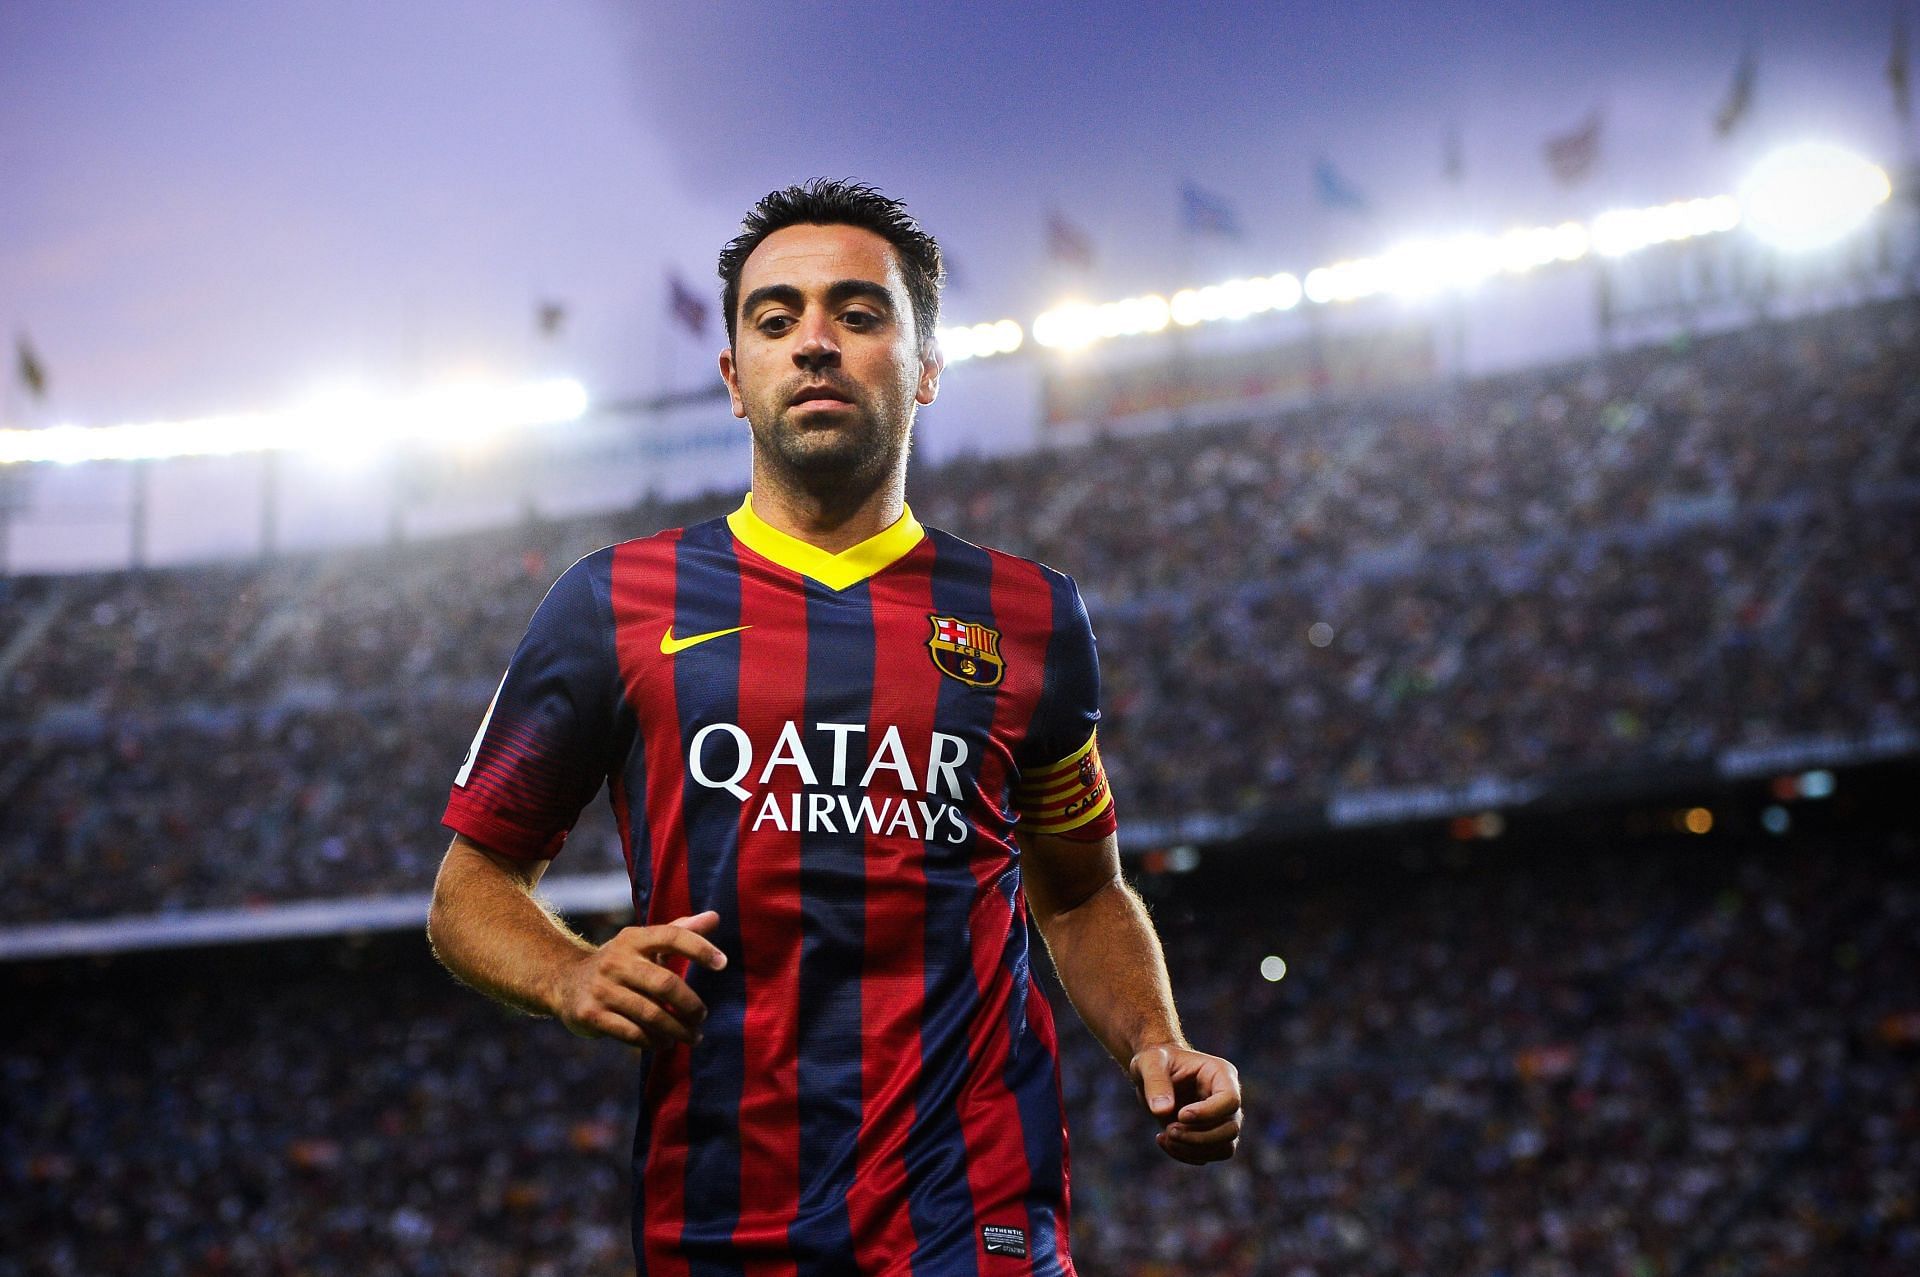 Xavi was one of the key players for Pep Guardiola durnig his time at Barcelona